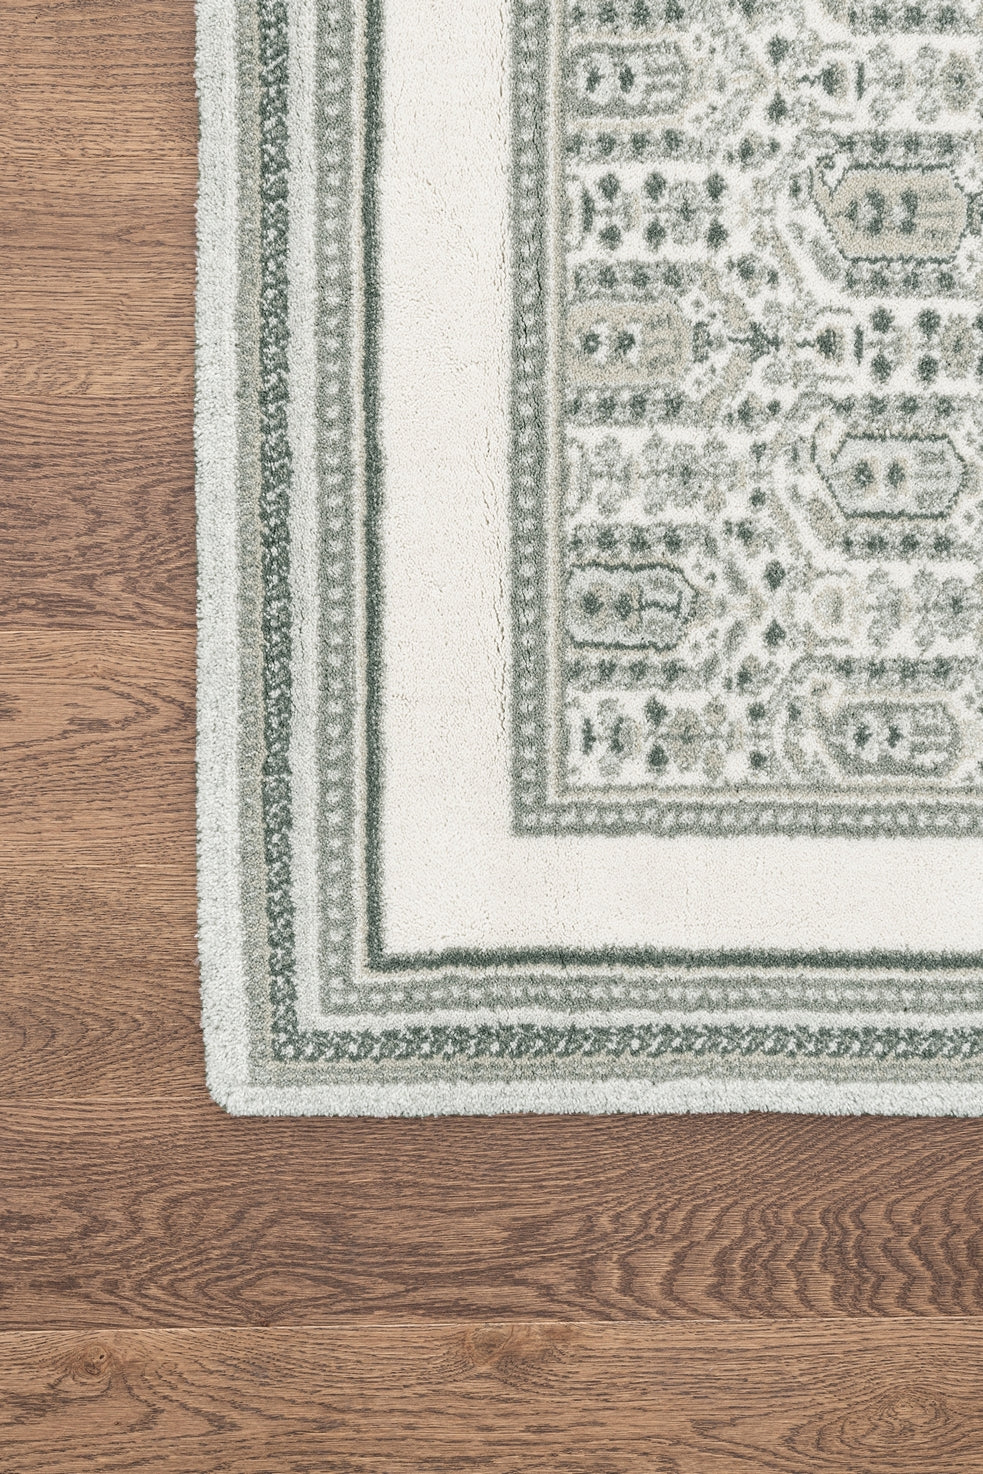 Agnella Rugs Calisia M TODOR Alabaster - 50% British Wool 50% New Zealand Wool - Free Delivery